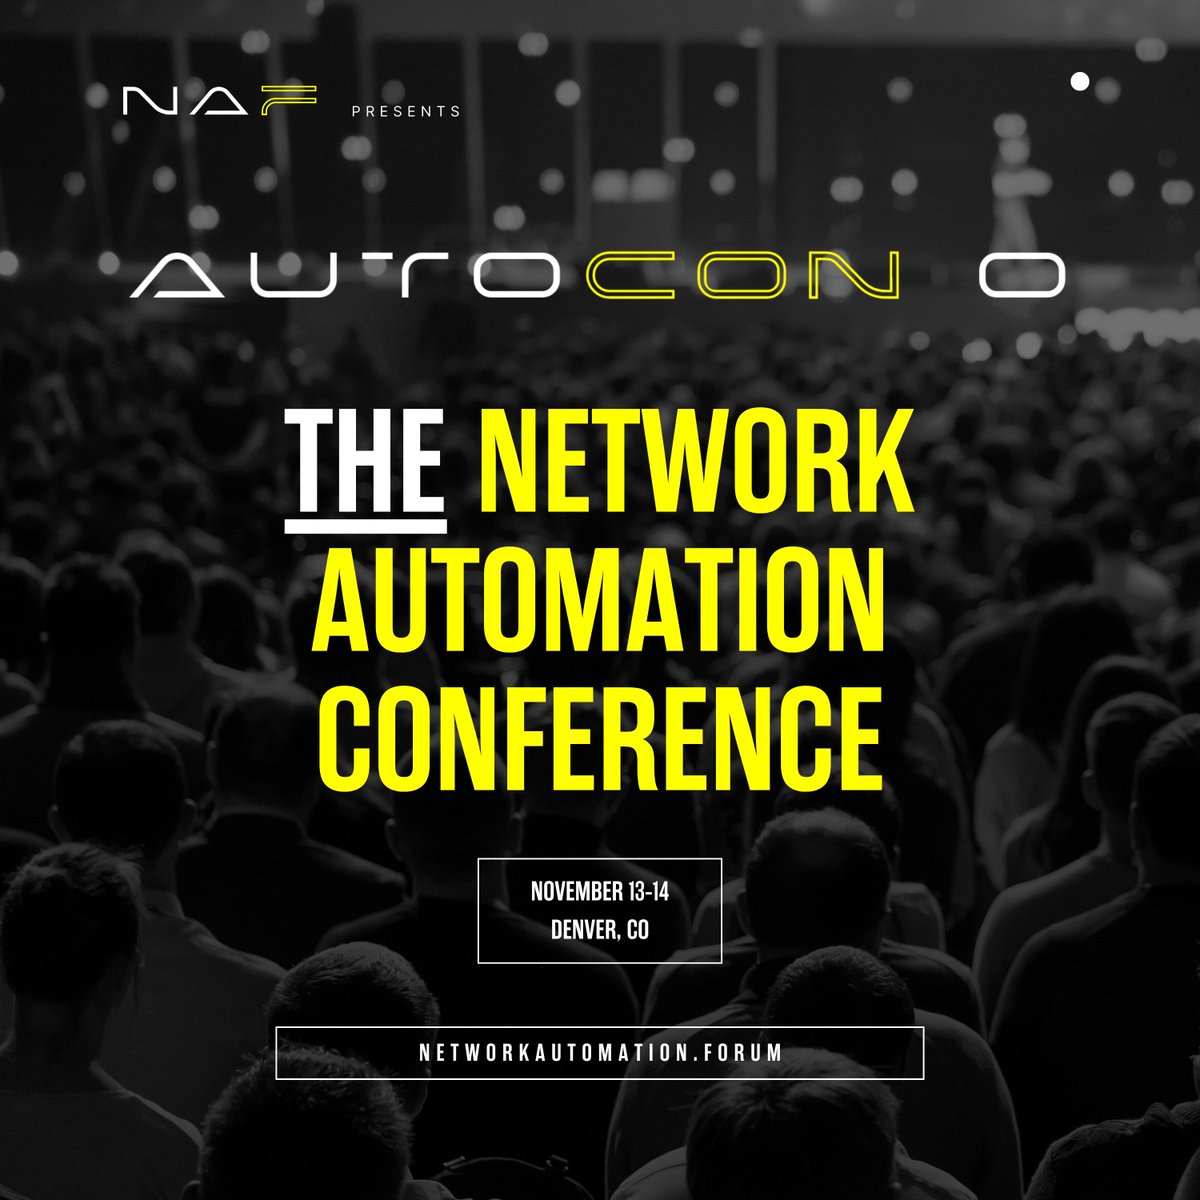 The the Network Automation Forum is a new org focused on driving adoption of #networkautomation. We're holding our first event in November. Please check out networkautomation.forum and consider joining us for #AutoCon0: networkautomation.forum/eventinfo/#reg… - we'd love to see you there!